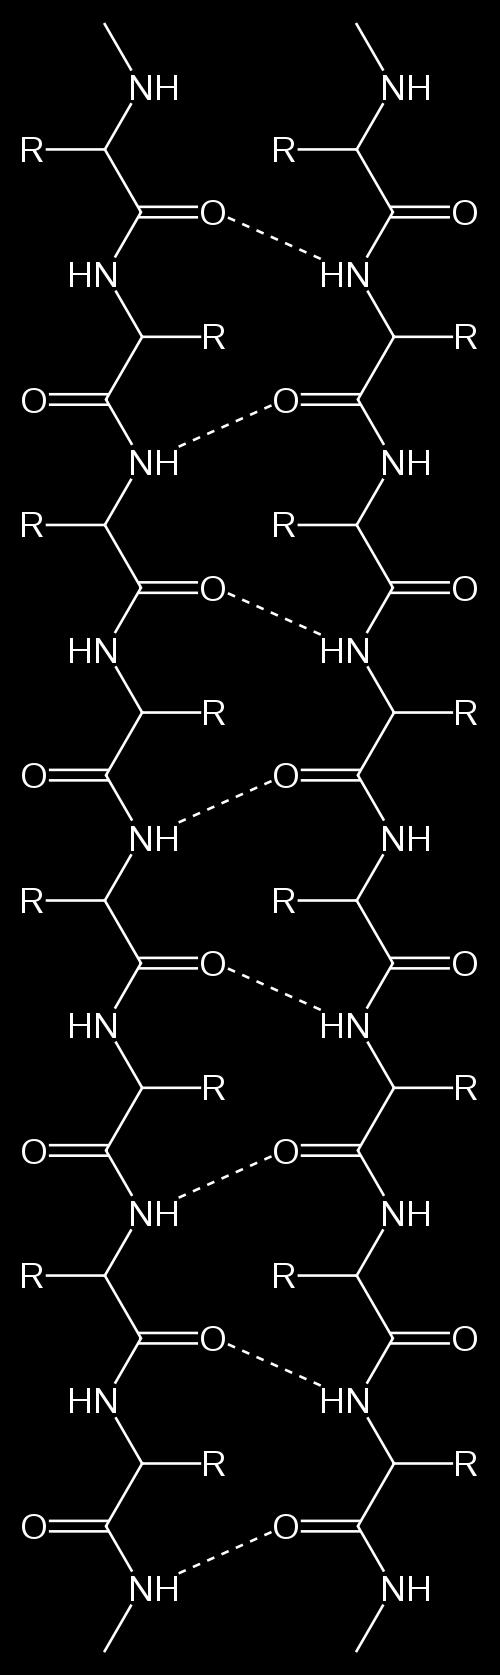 are held together by H bonds: There are two possible